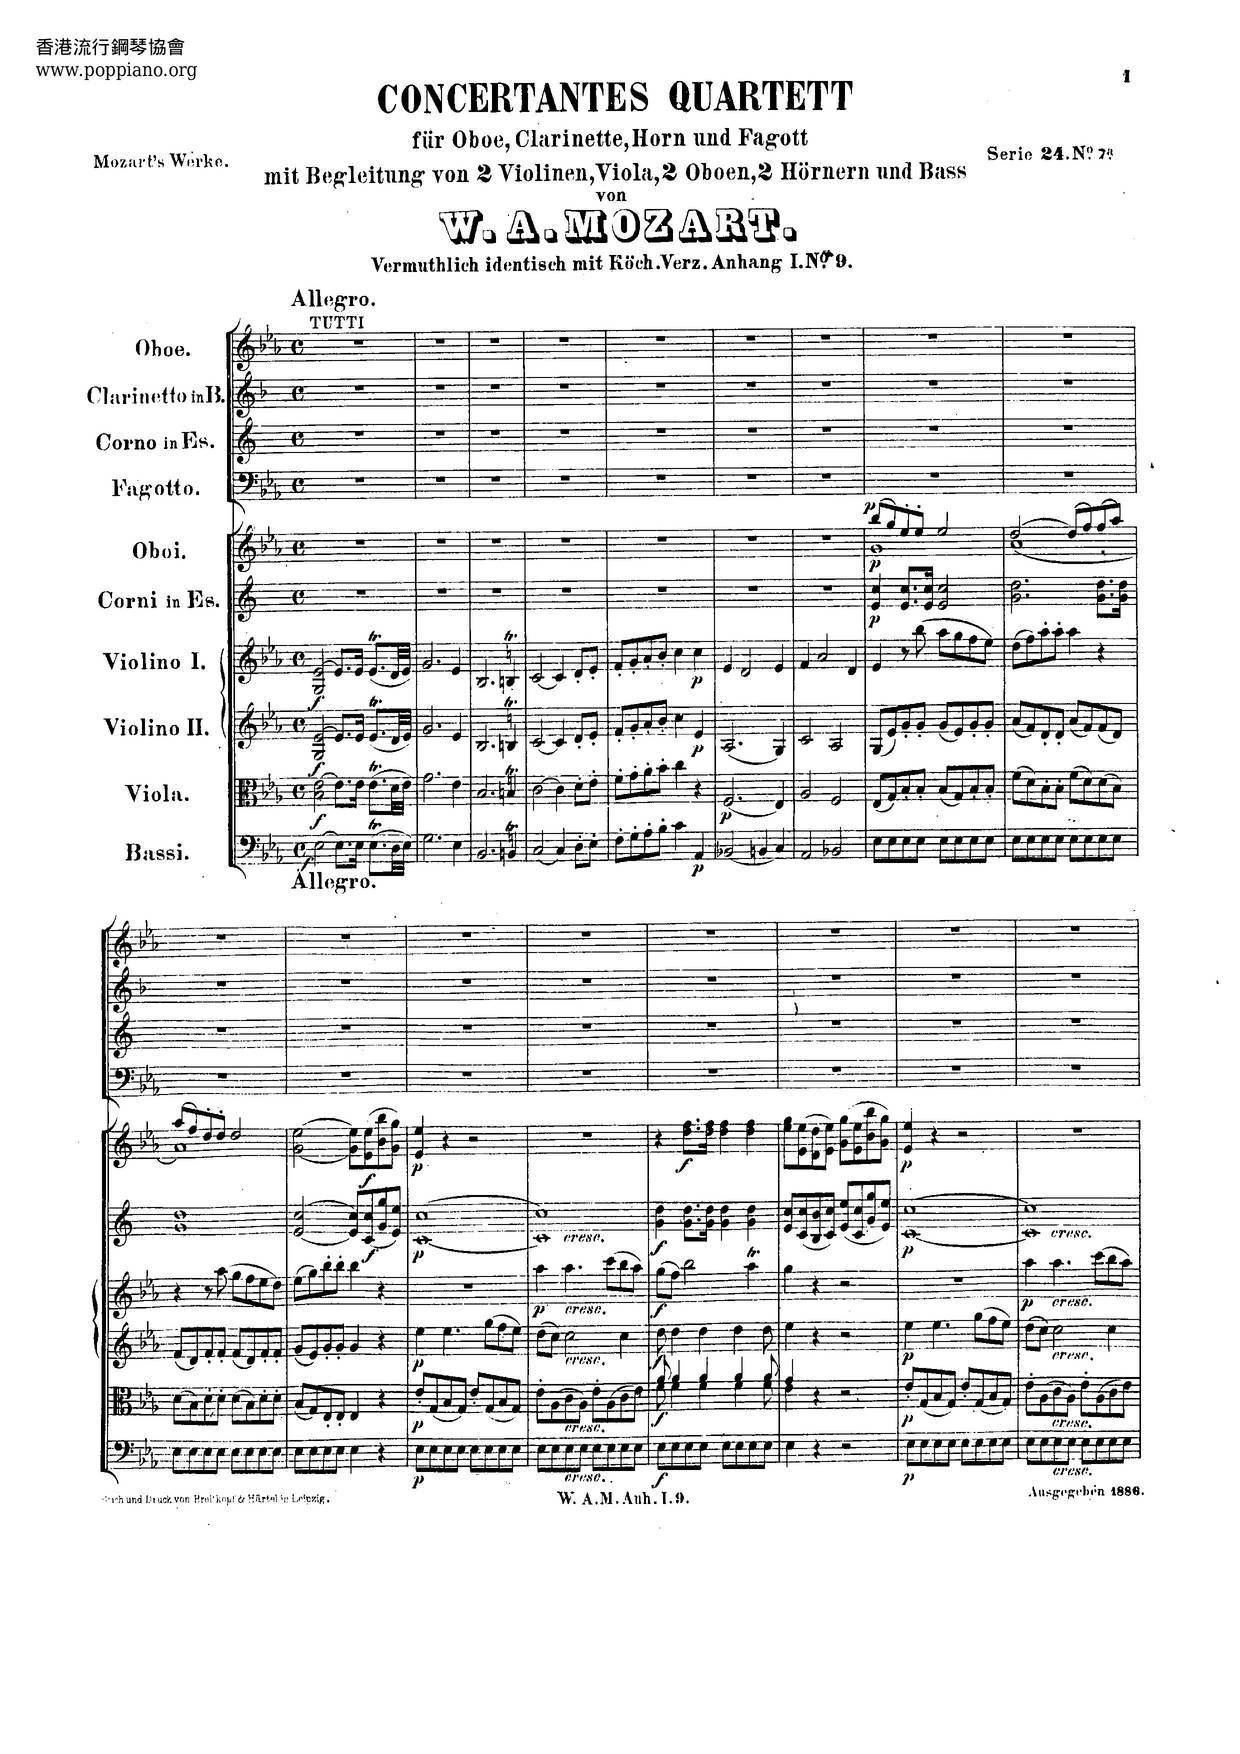 Sinfonia Concertante In E-Flat Major, K. 297B/Anh.c 14.01 Score